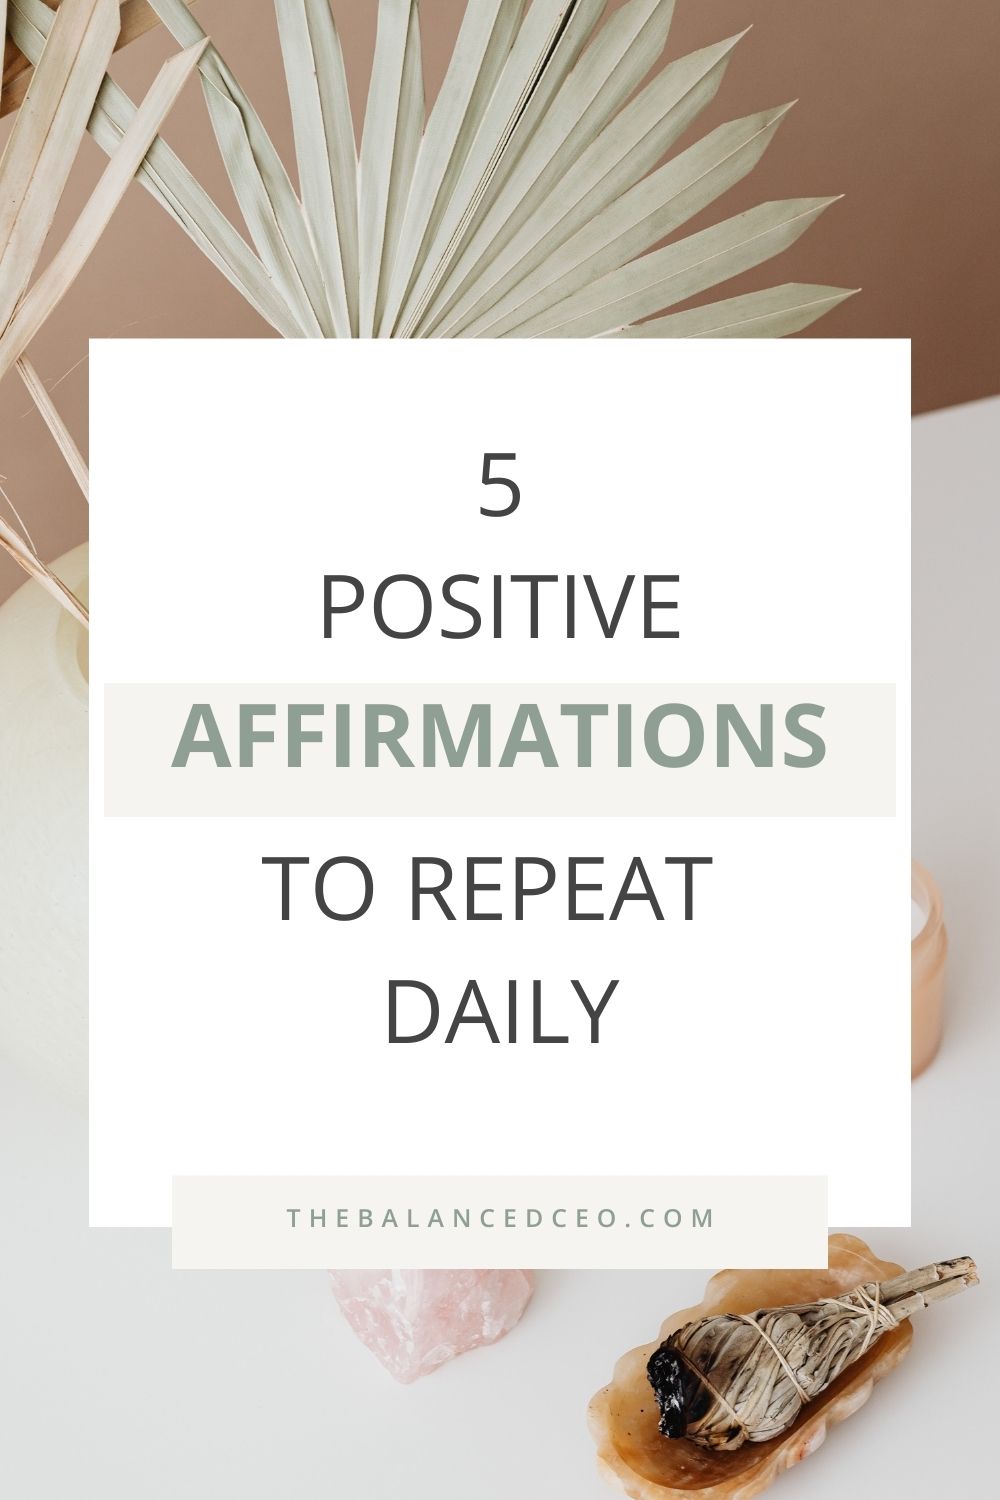 5 Positive Affirmations to Repeat Every Day